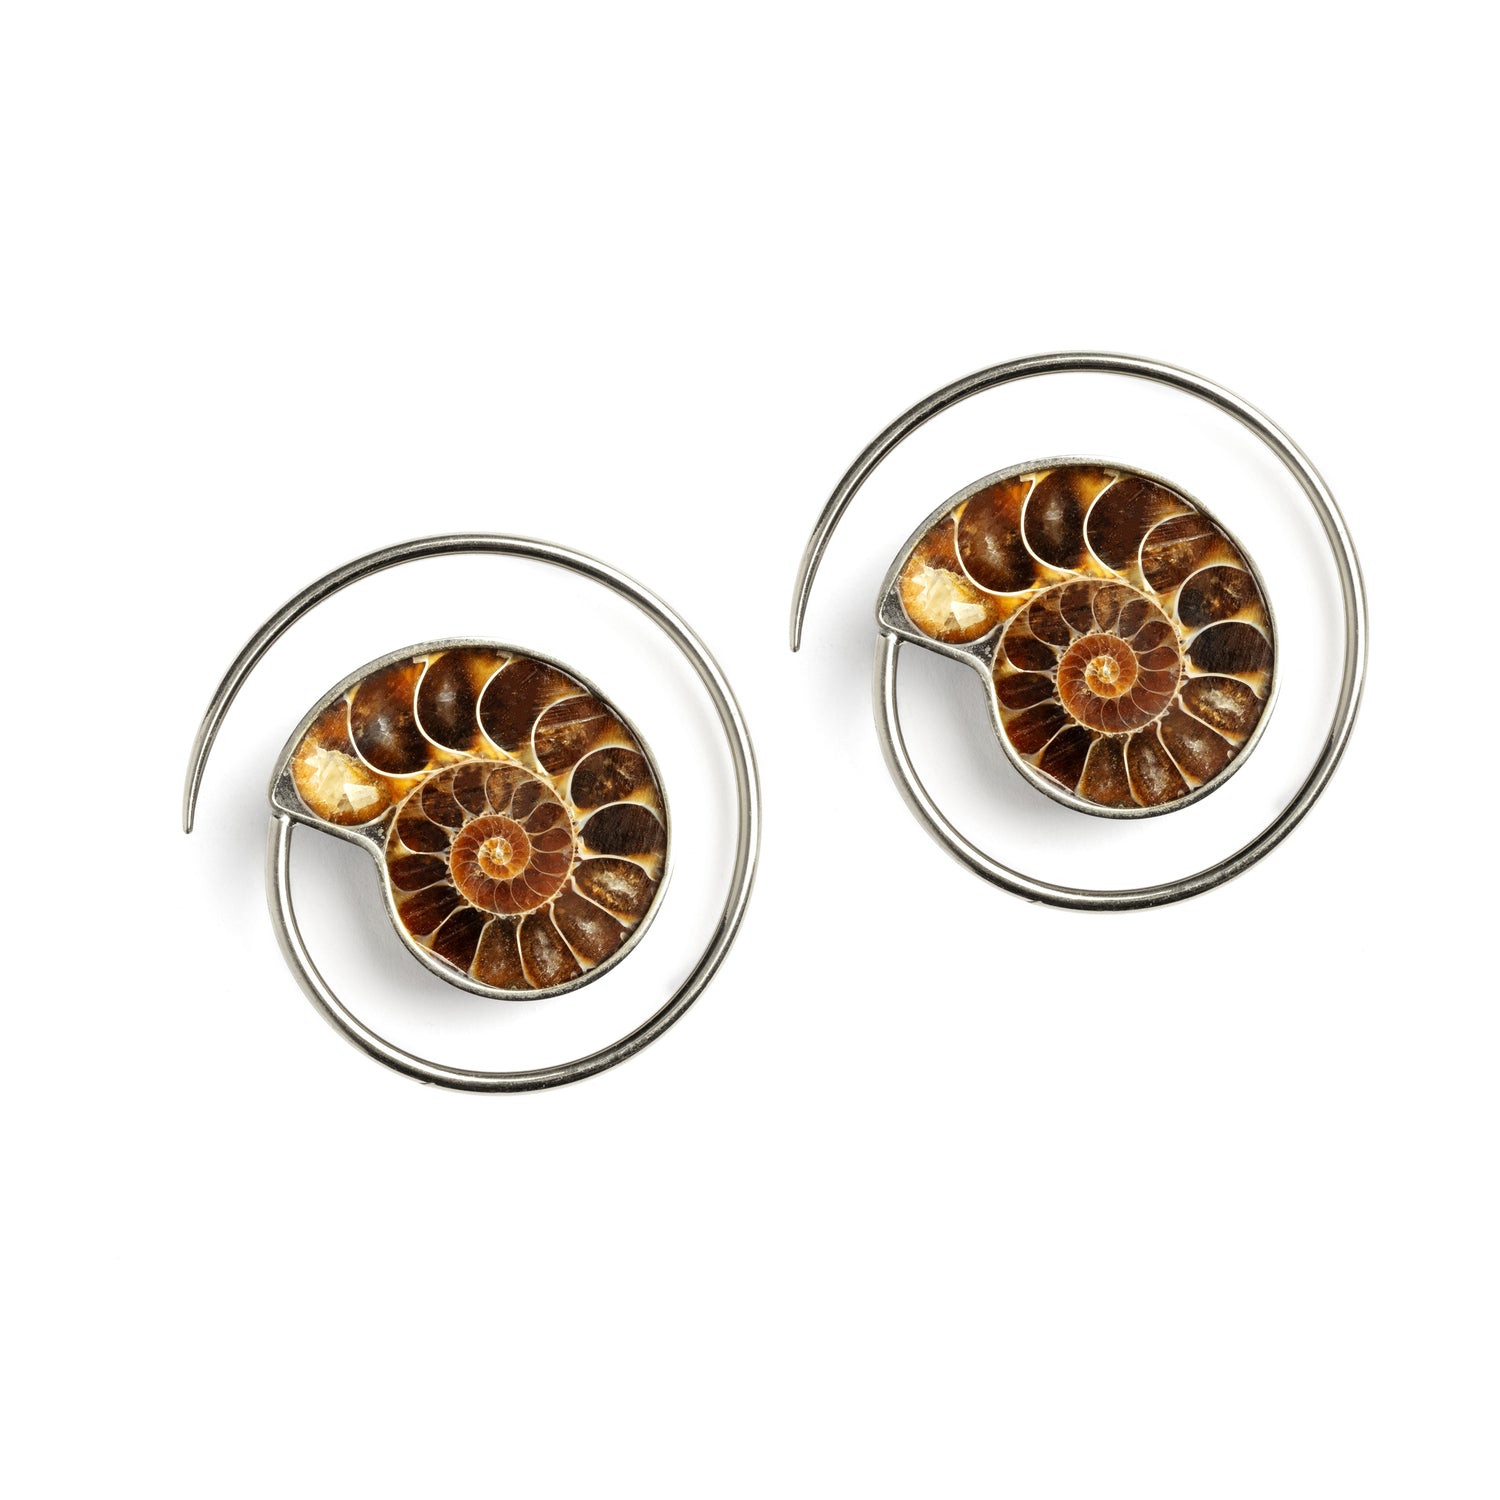 pair of silver spirals ear weights hangers with Ammonite fossil frontal view